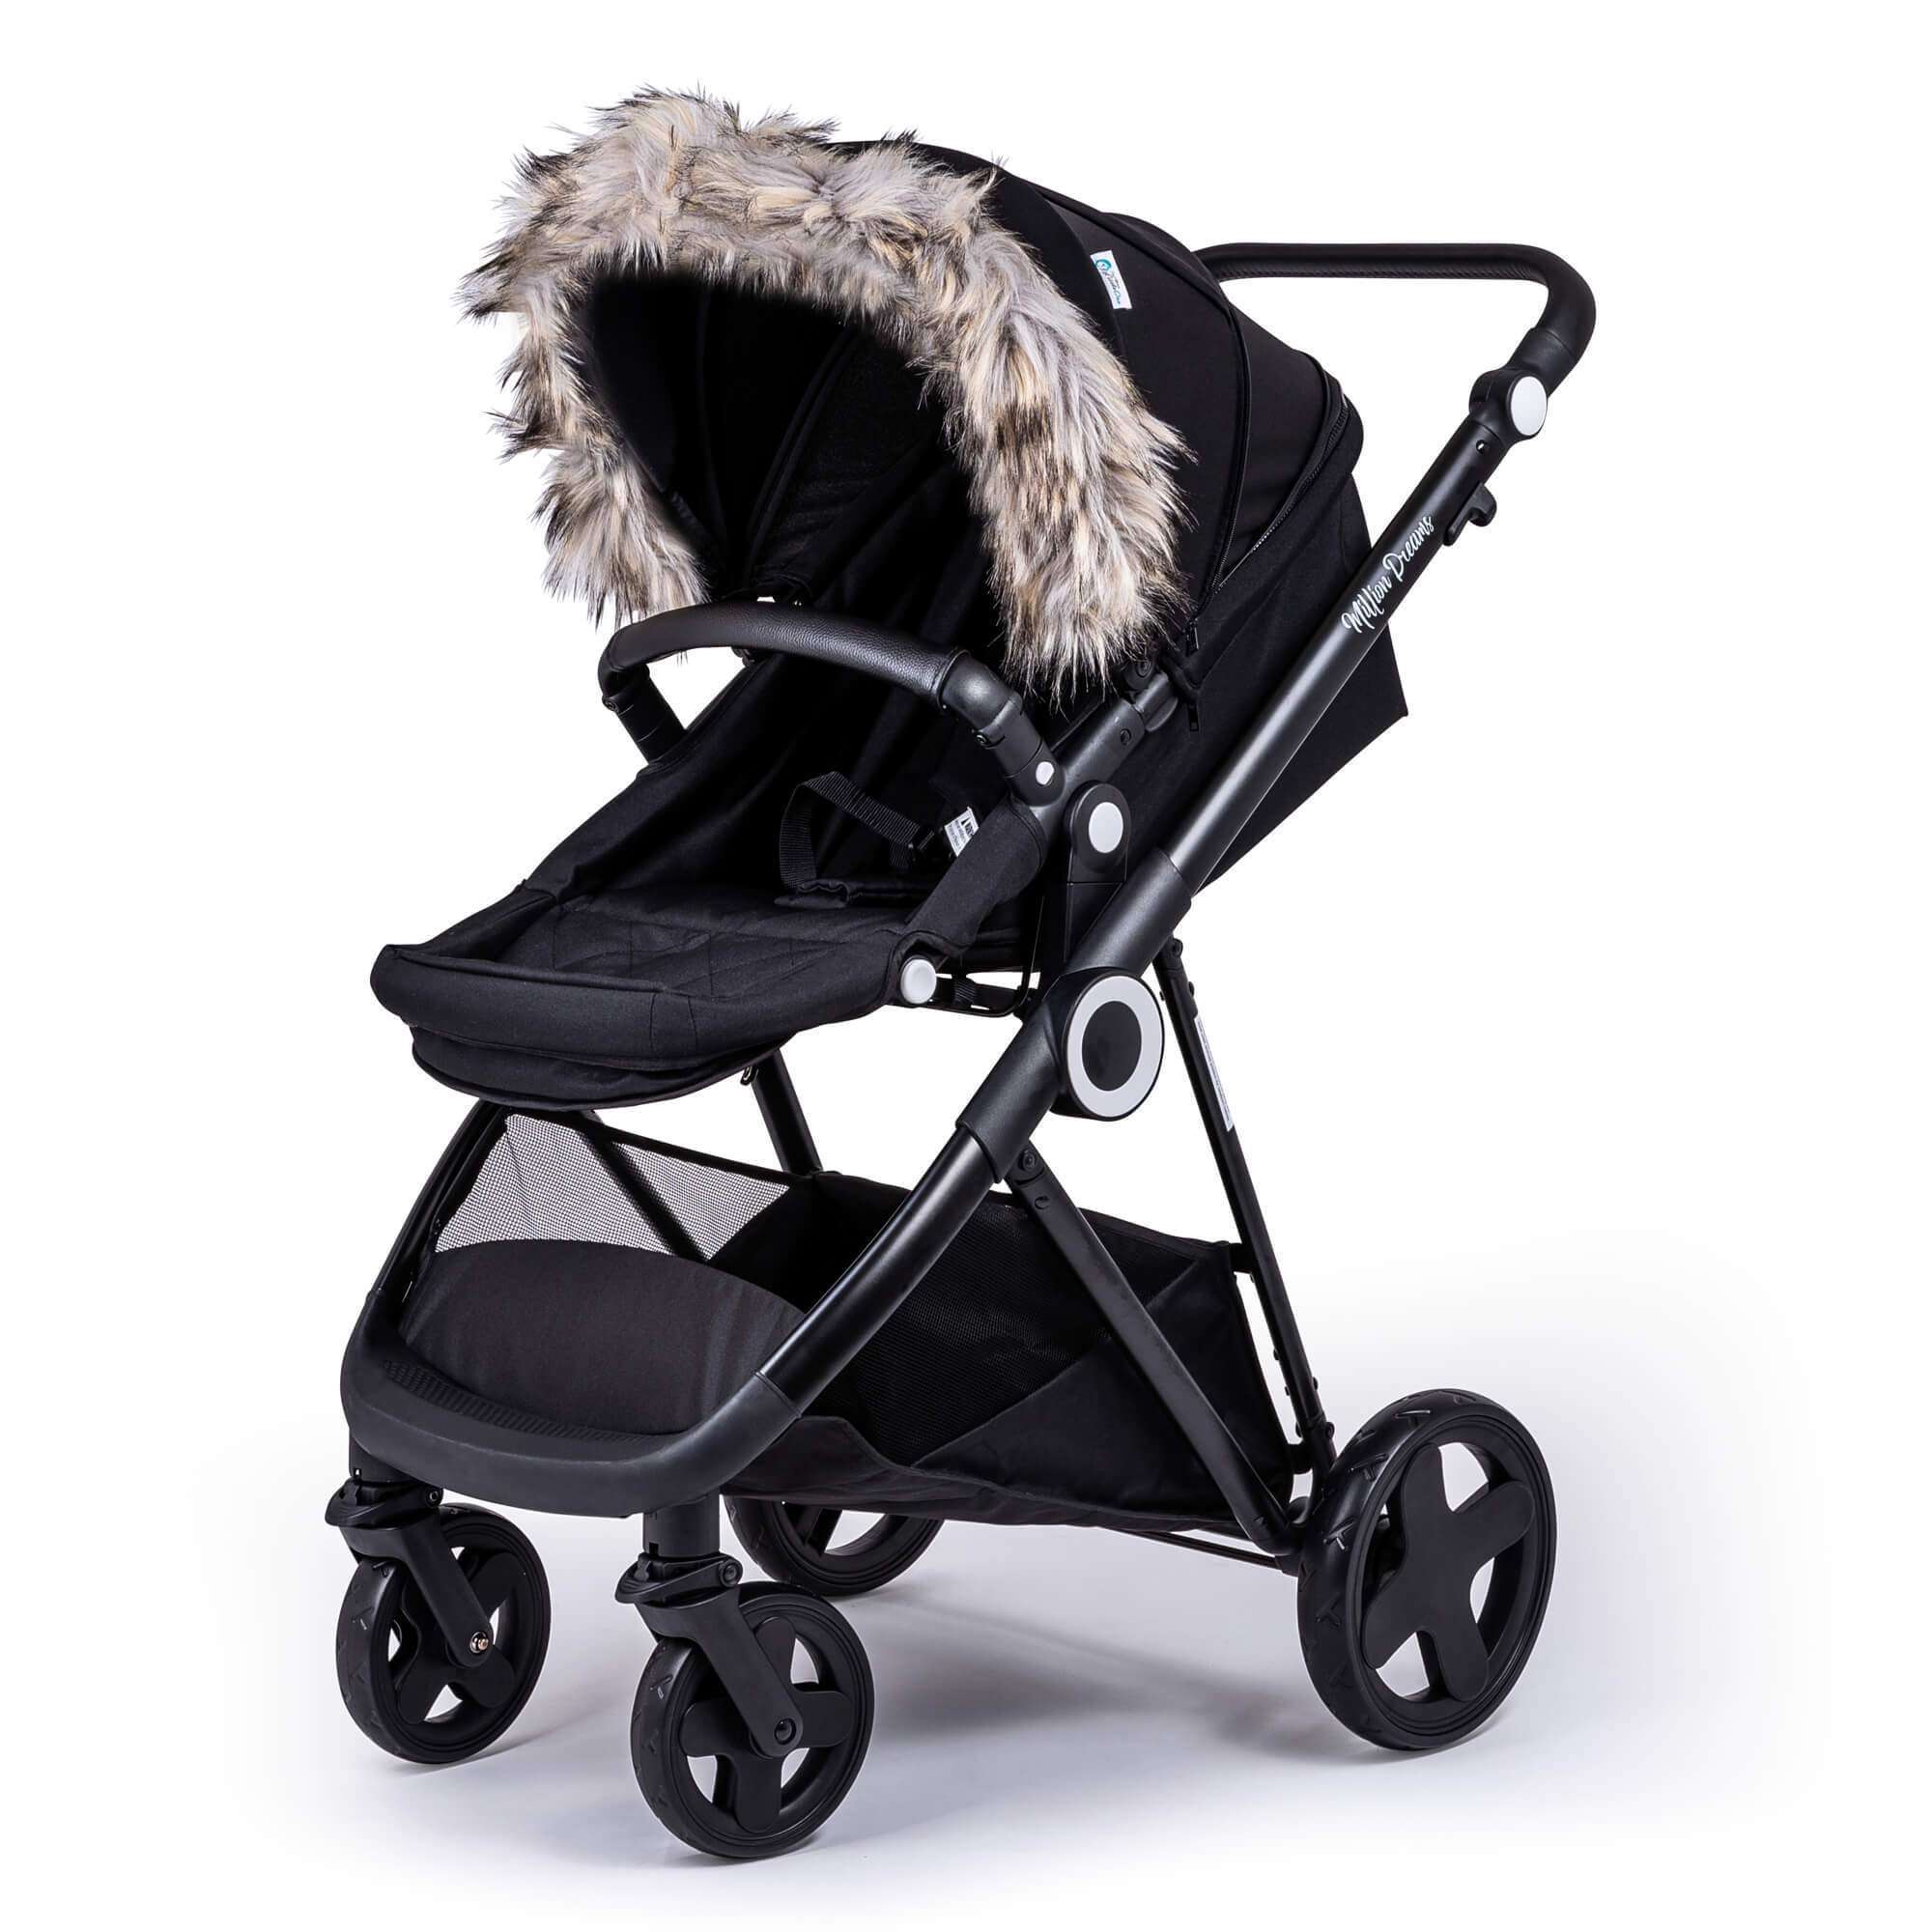 Pram Fur Hood Trim Attachment for Pushchair Compatible with Babylo - Light Grey / Fits All Models | For Your Little One